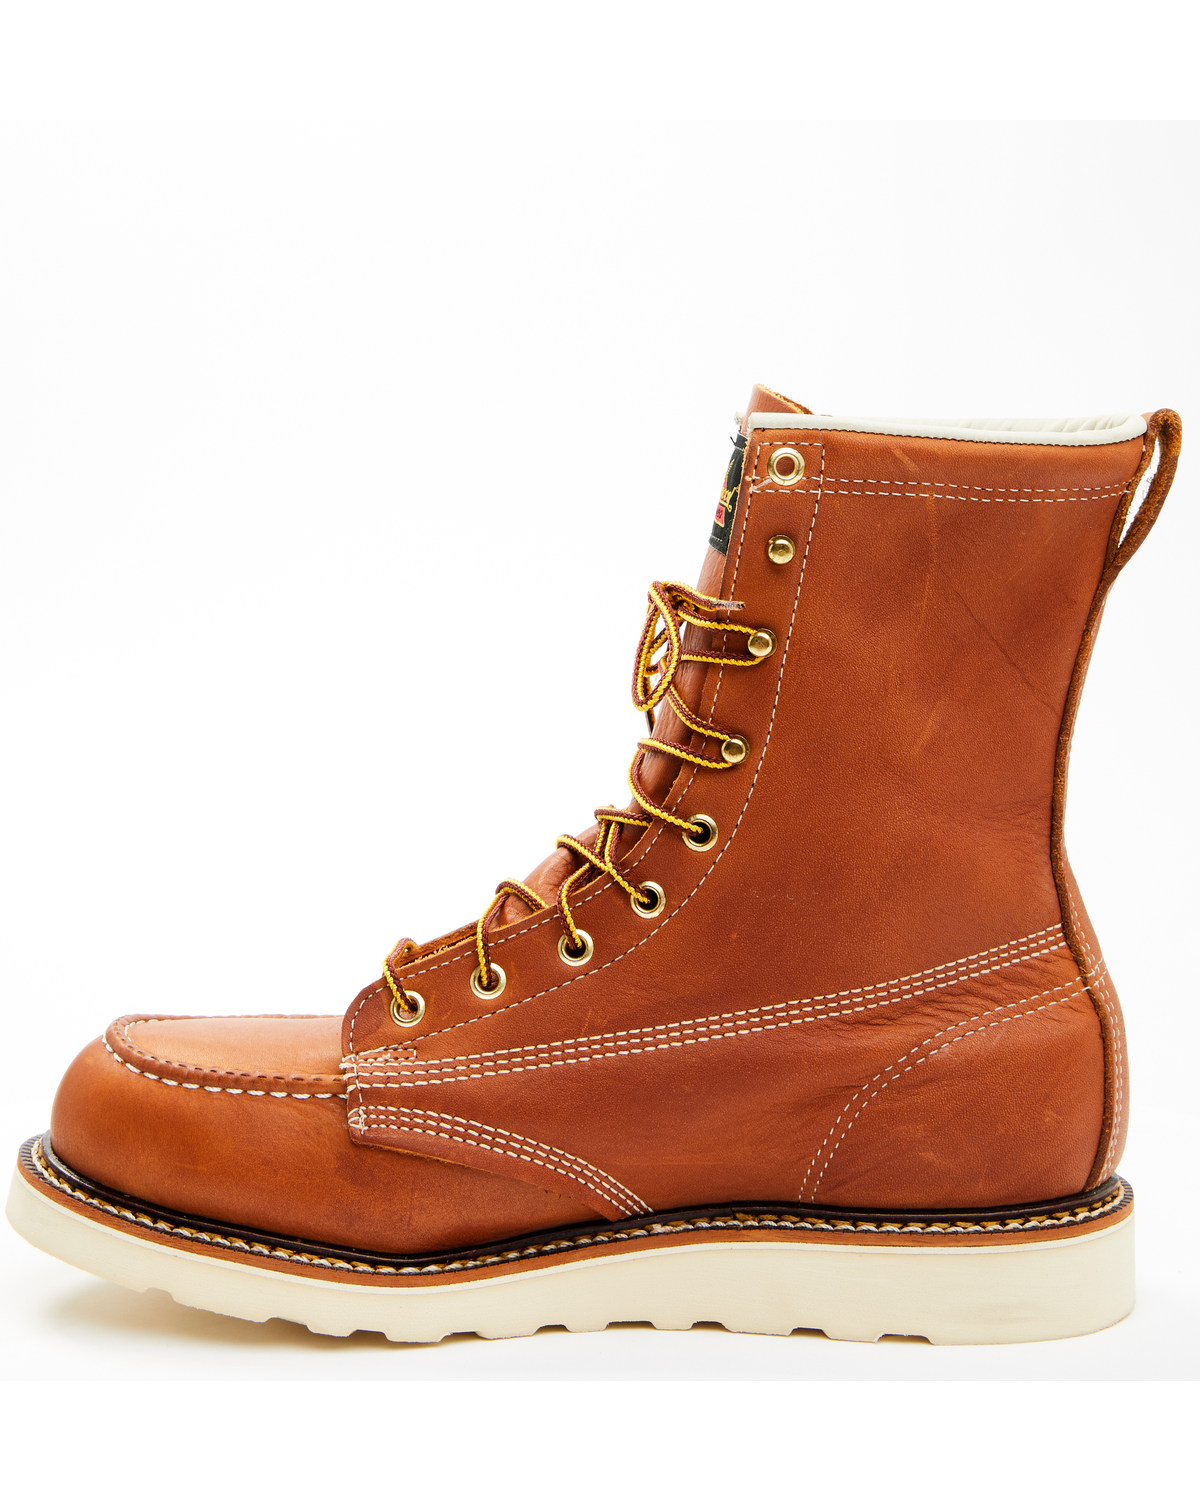 Thorogood Men's American Heritage 804-4208 8" Tobacco Oil-Tanned Moc Steel Toe Boot - image 3 of 7